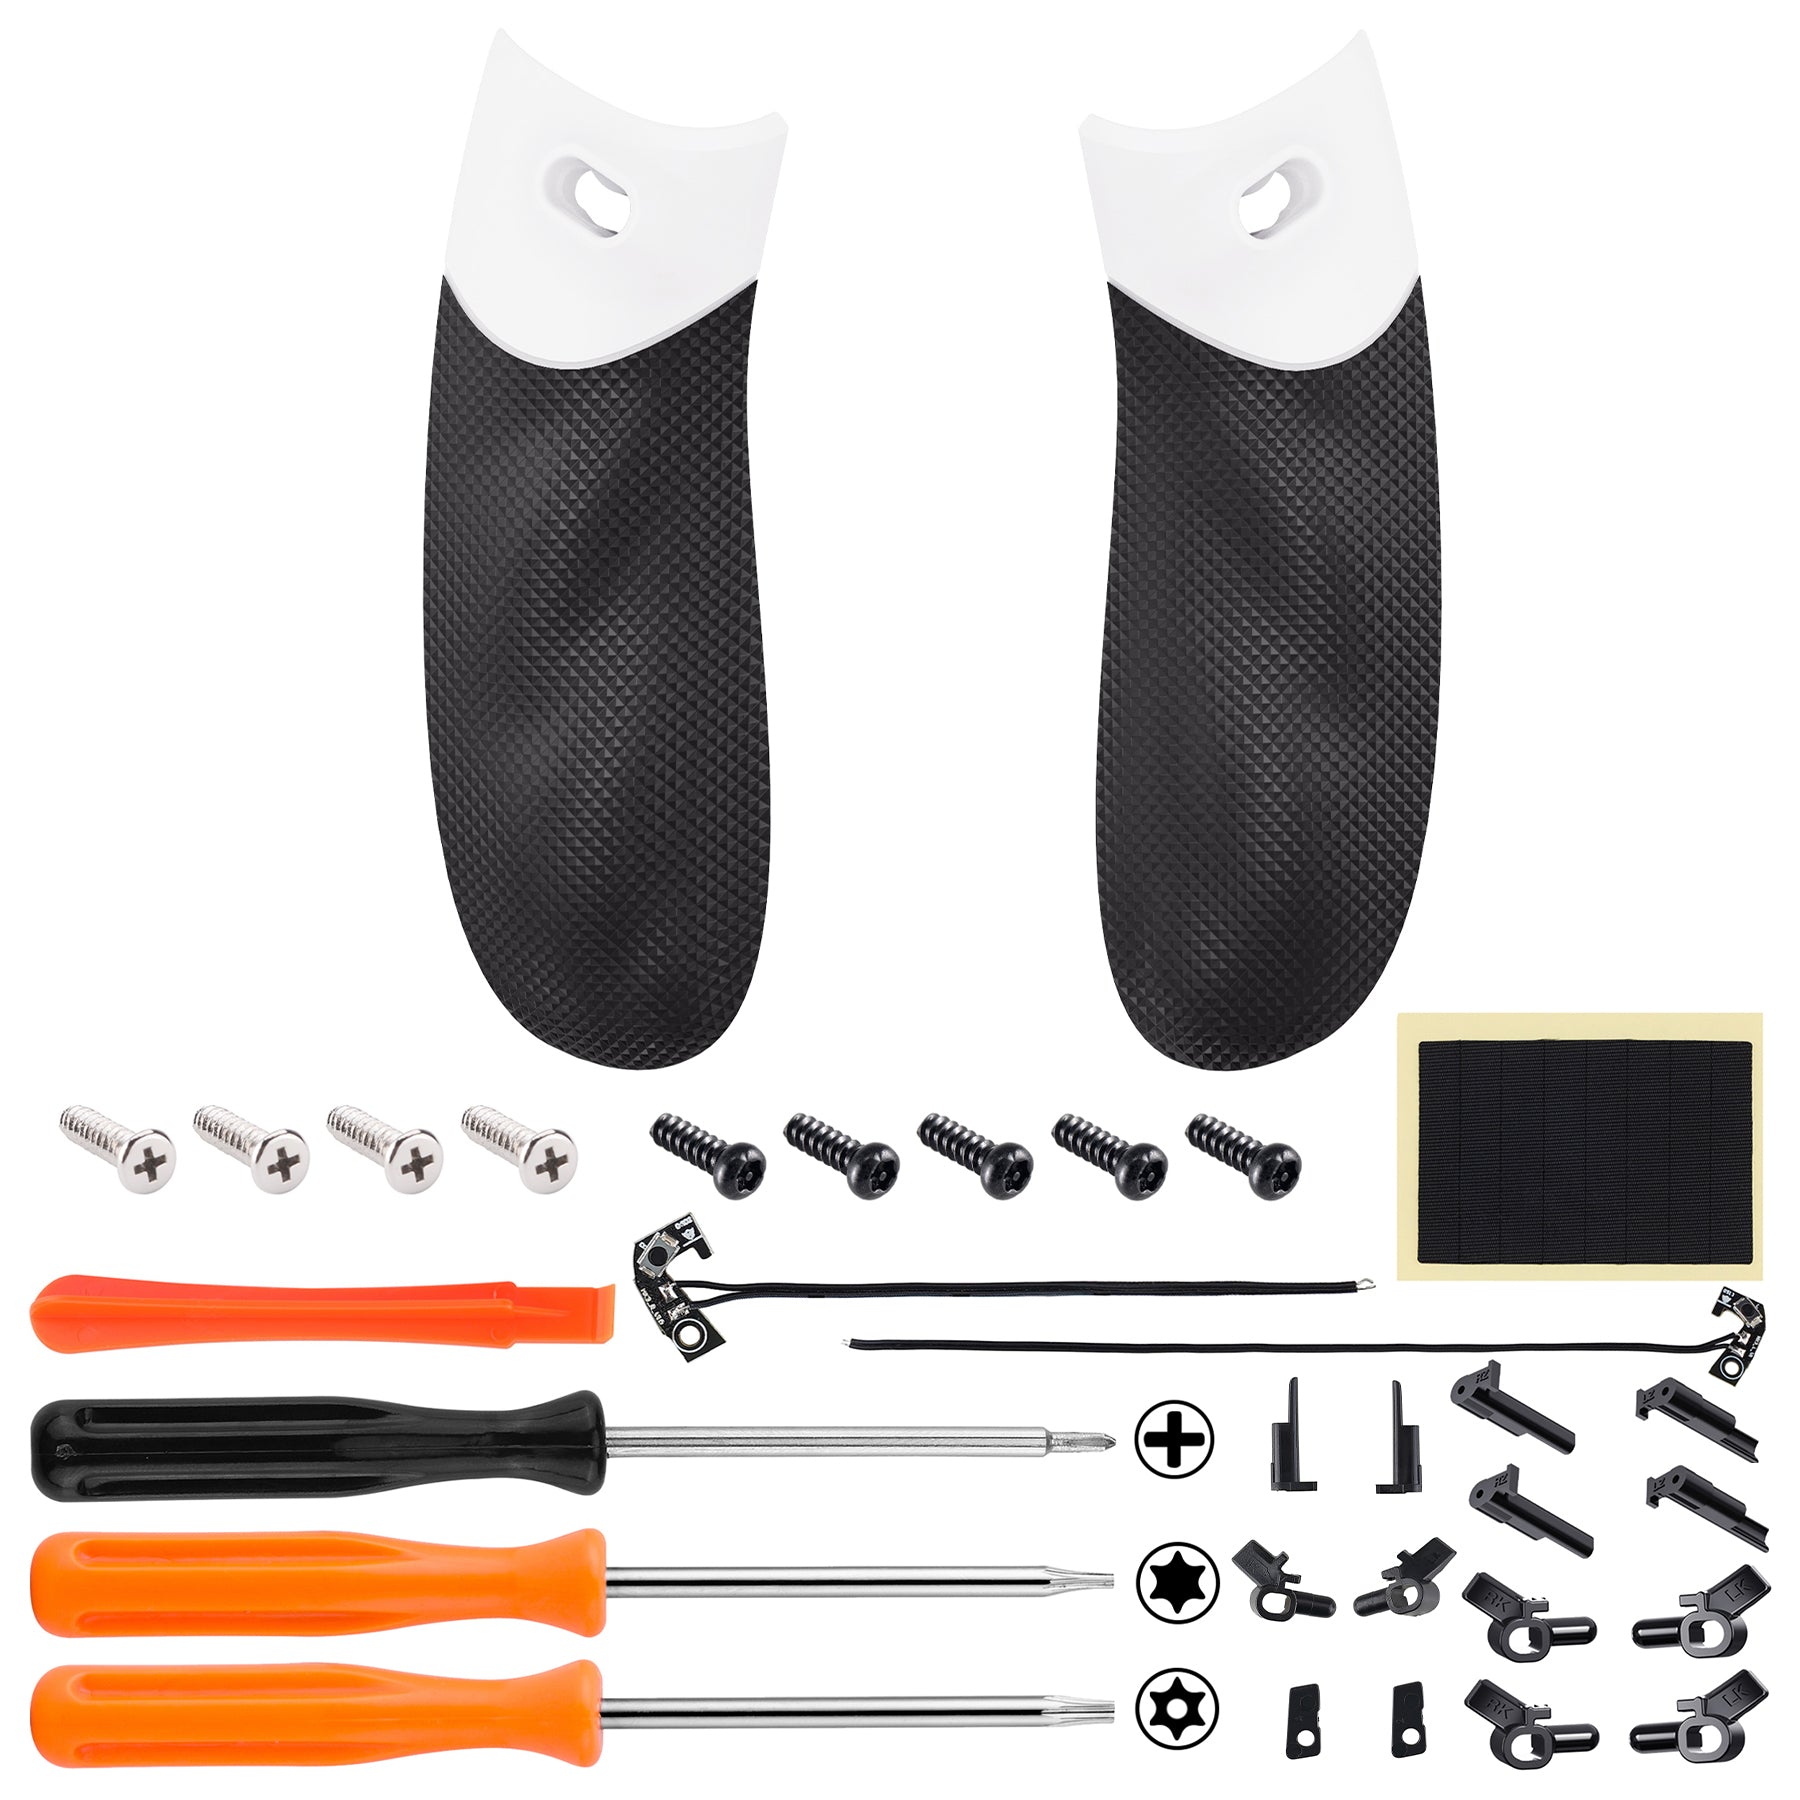 eXtremeRate Retail Flexor Clicky Rubberized Side Rail Grips Trigger Stop Kit for Xbox Series X & S Controller, Diamond Textured White Anti-Slip Ergonomic Trigger Stopper Handle Grips for Xbox Core Controller - PX3Q3004P